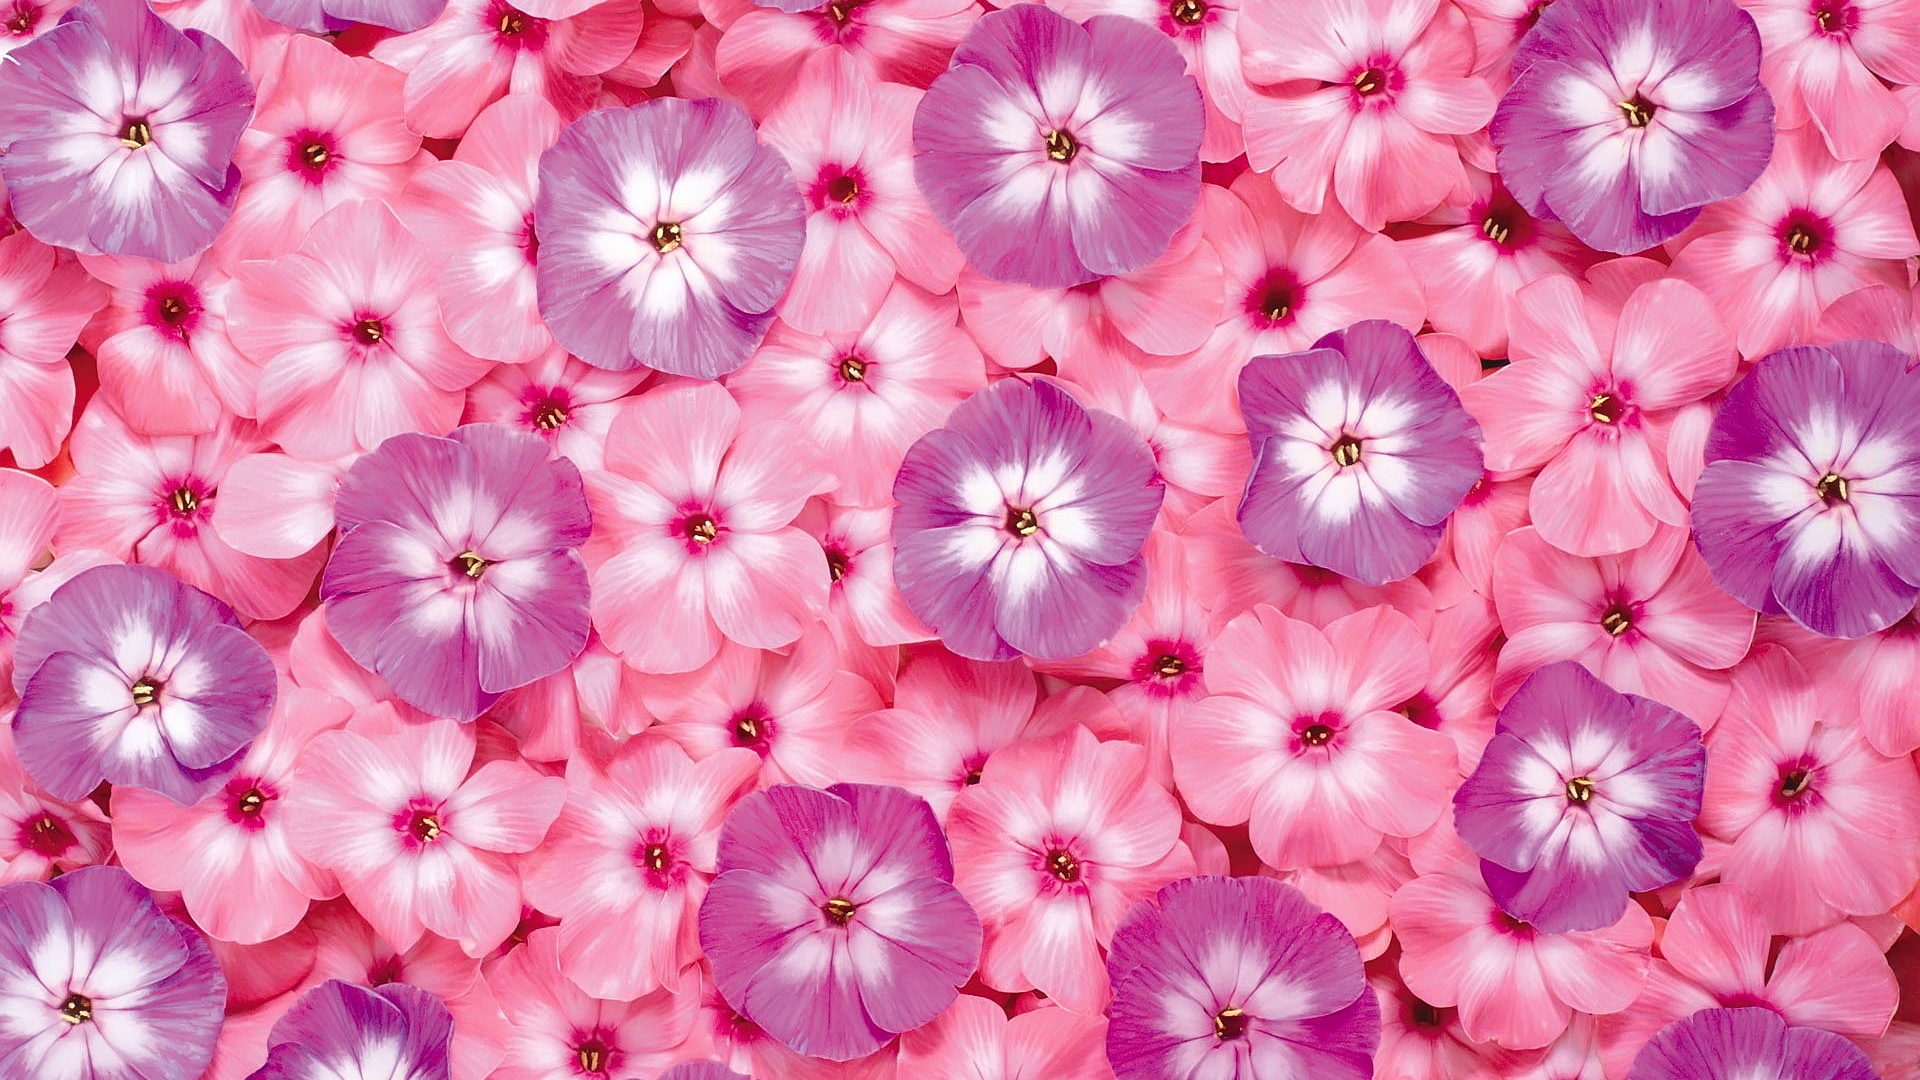 Gallery For Gt Pink Flowers Wallpaper